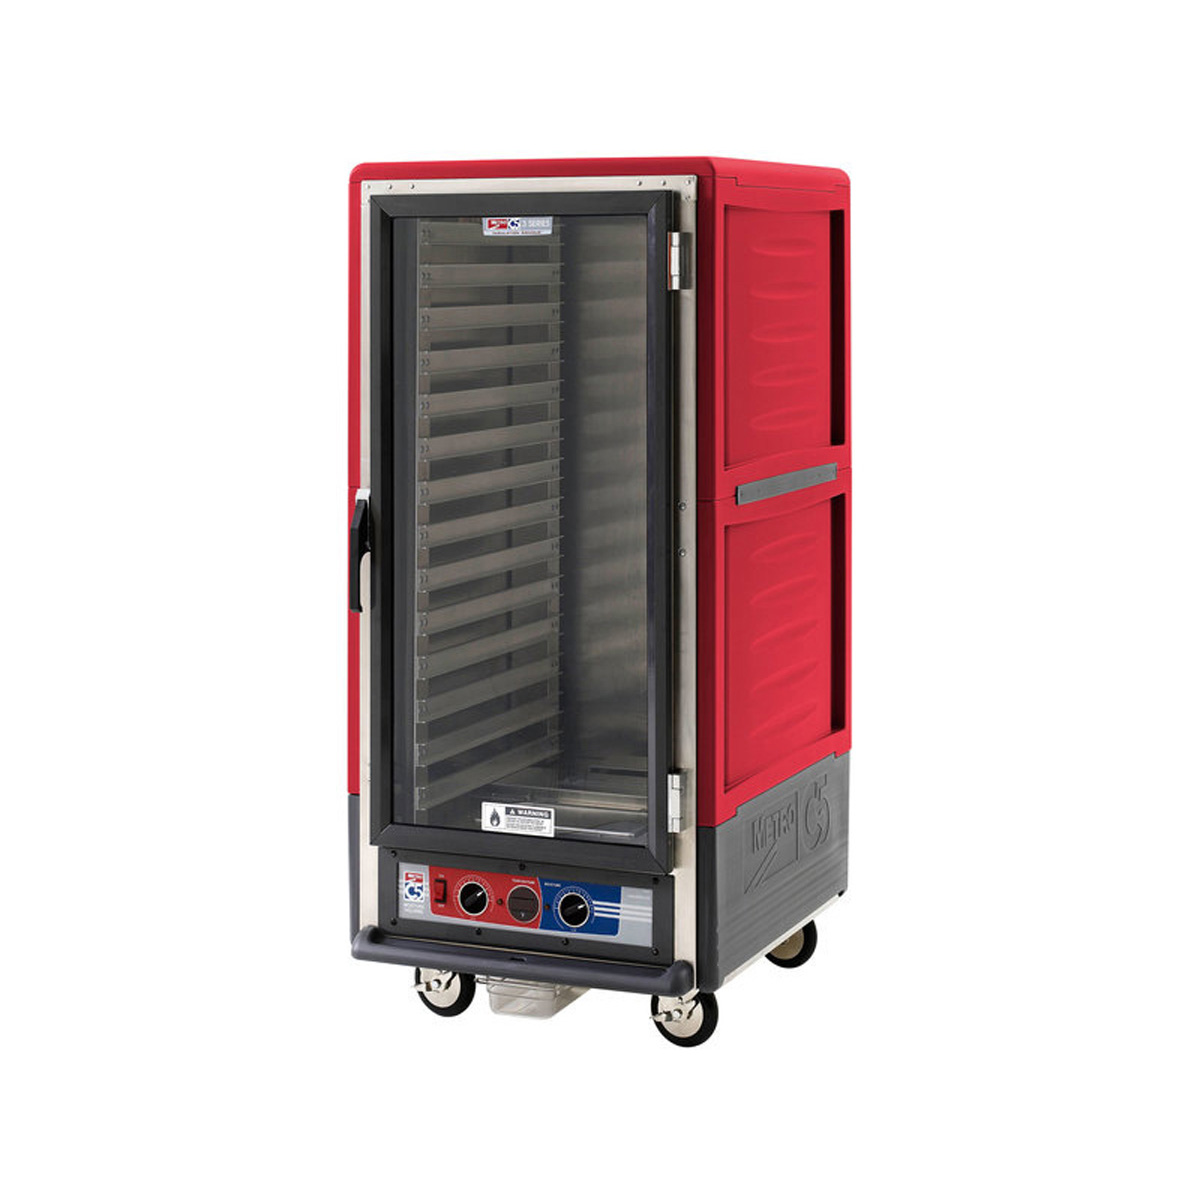 Metro C537-MFC-LA C5 3 Series Insulated Mobile Proofing and Holding Cabinet